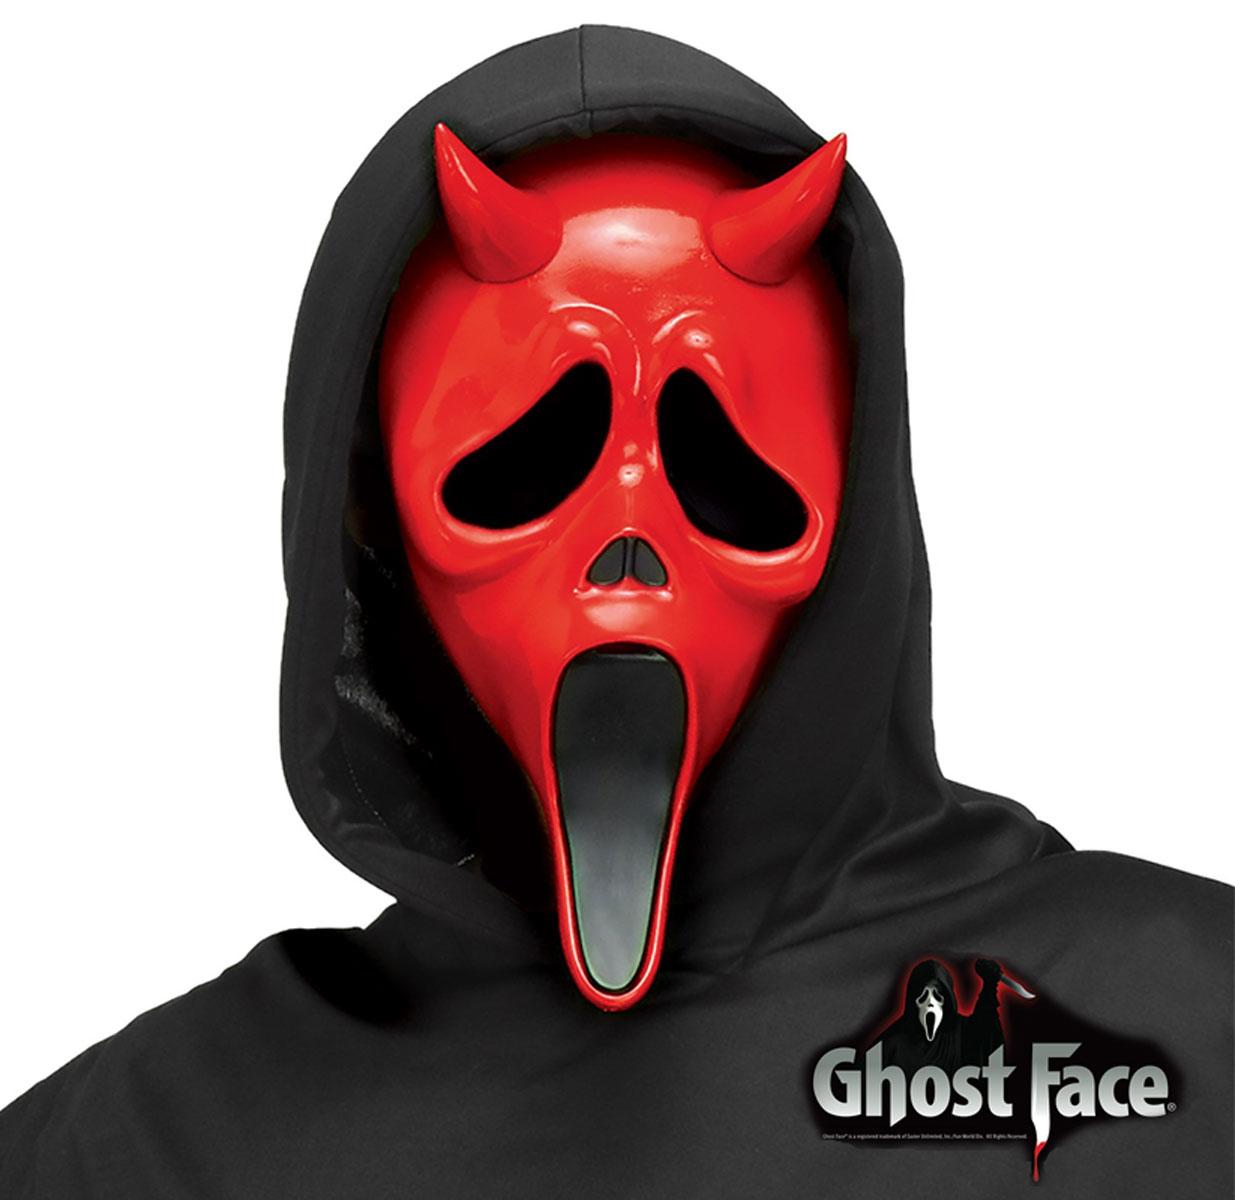 Deluxe Devil Ghost Face Mask fully licensed by Fun World 93333 available here at Karnival Costumes online party shop